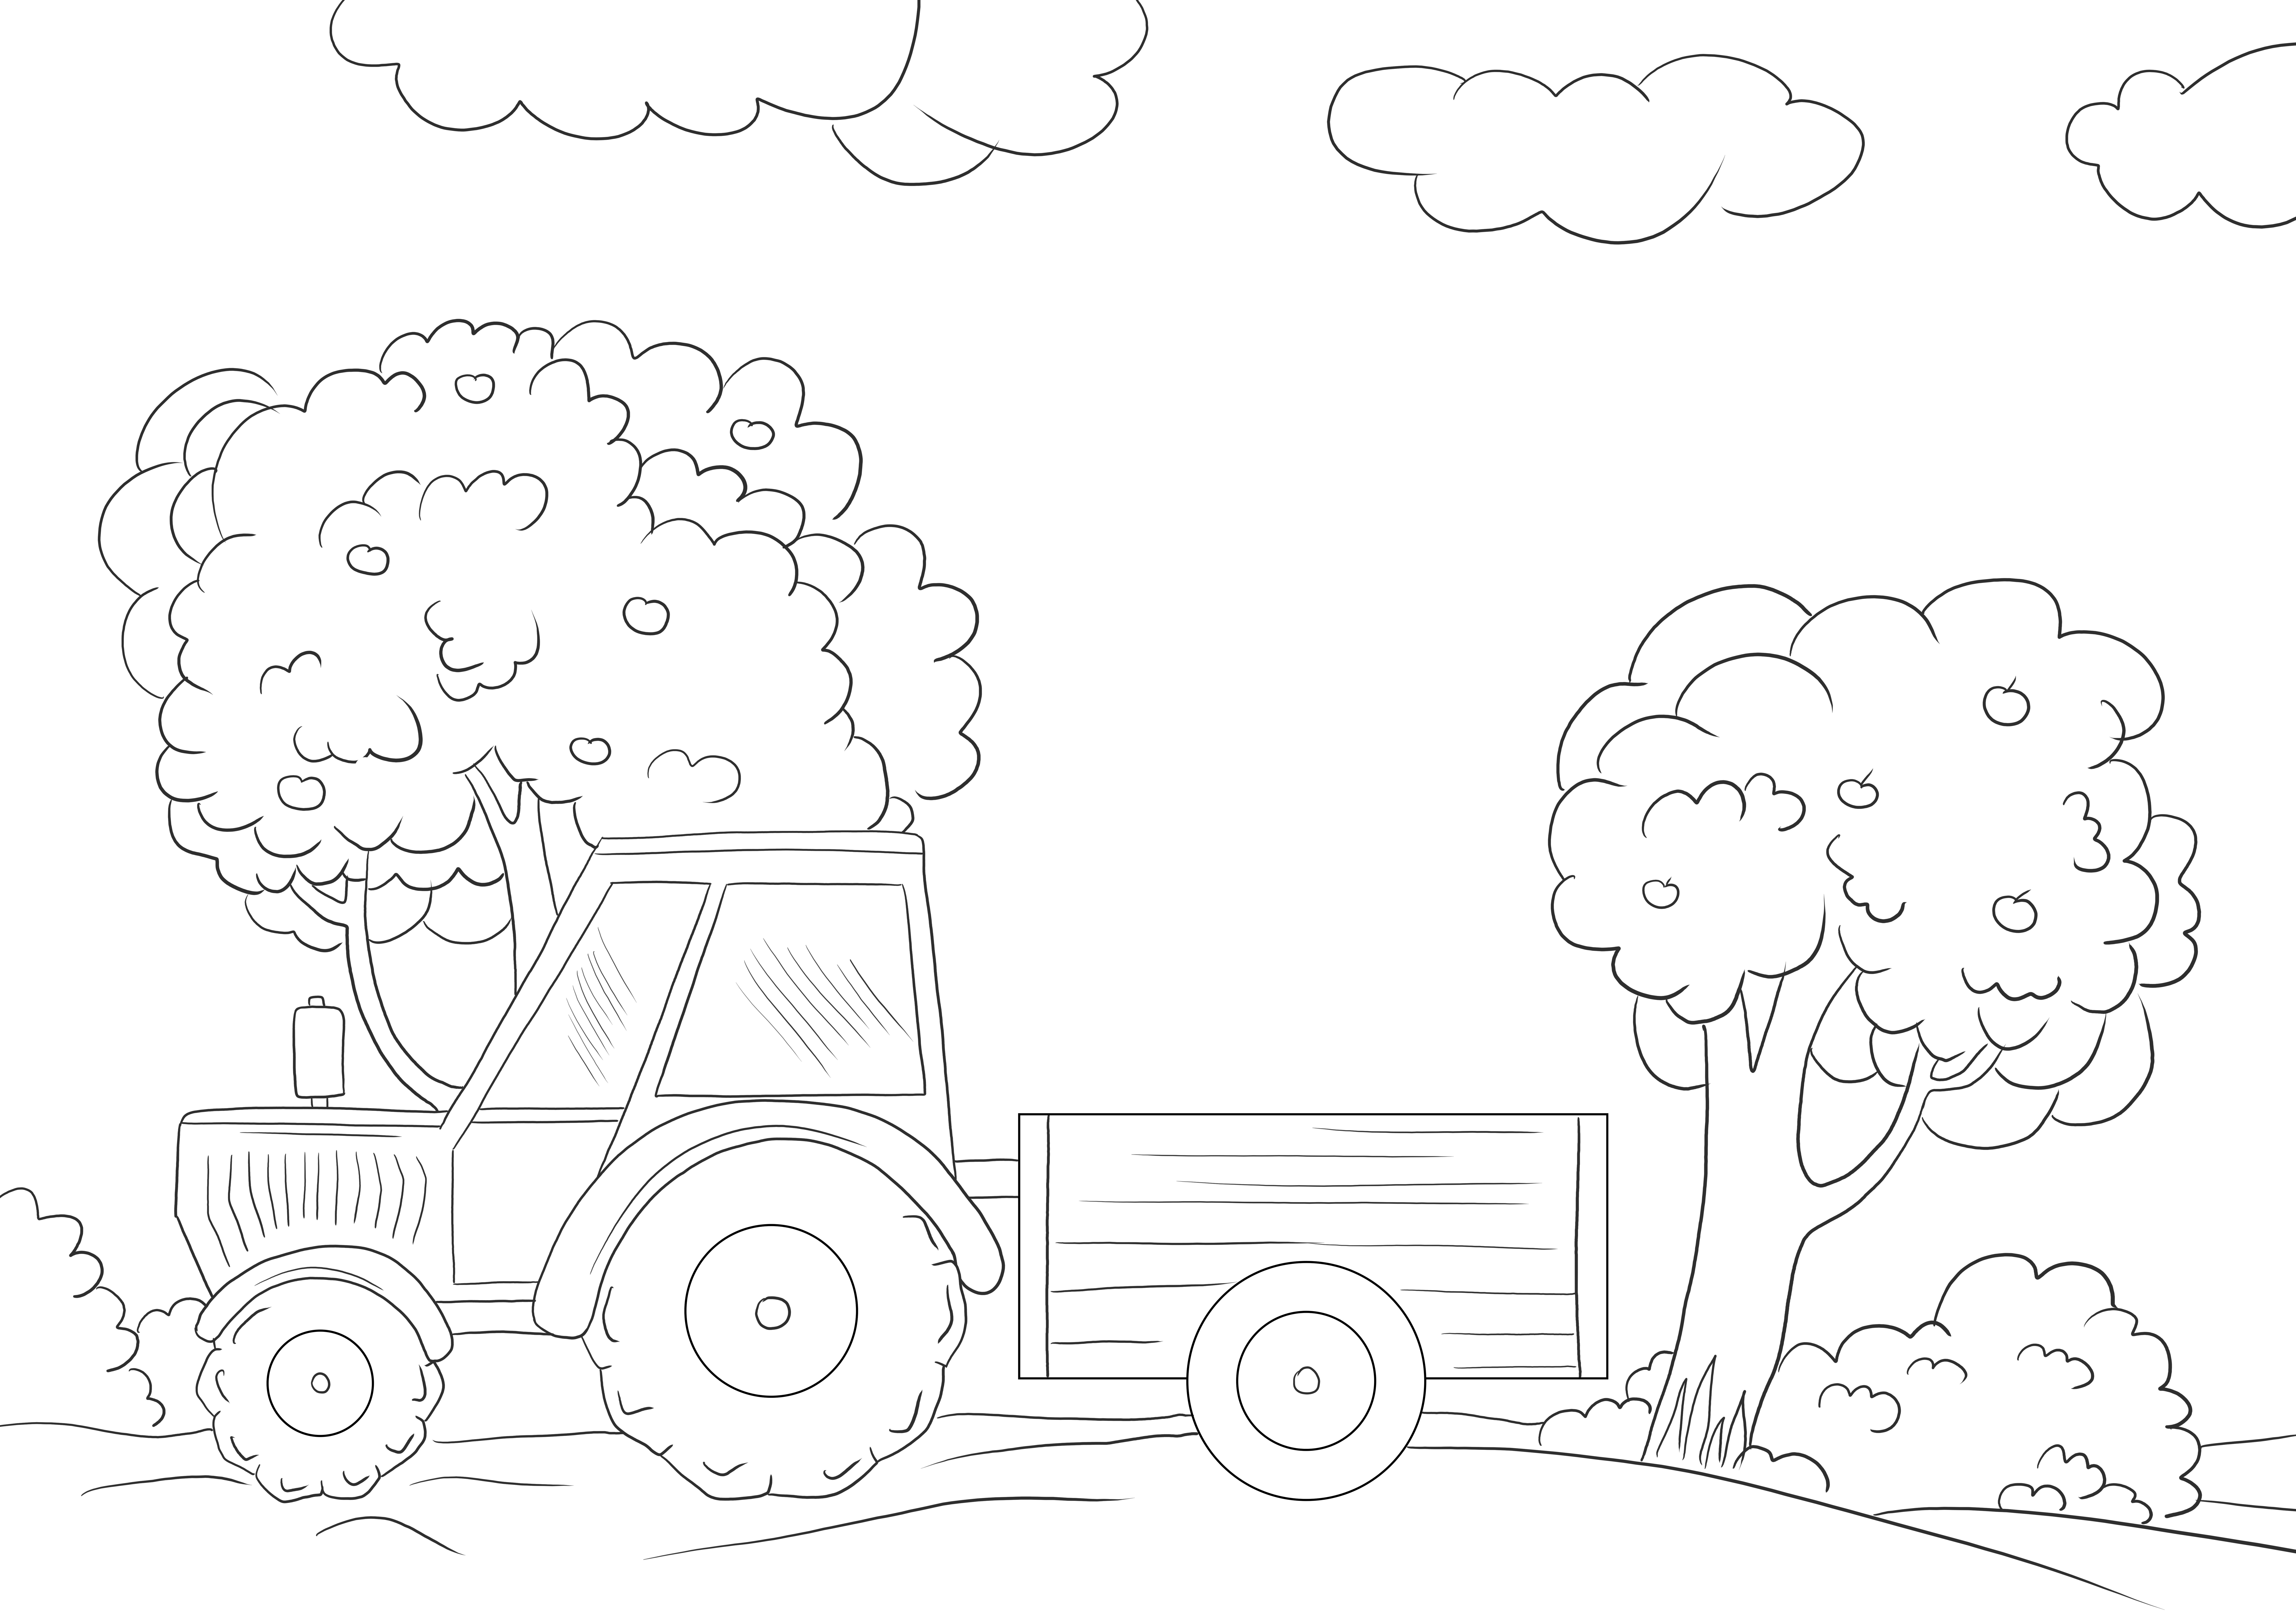 Easy to color sheet of a tractor and trailer and free to print and download